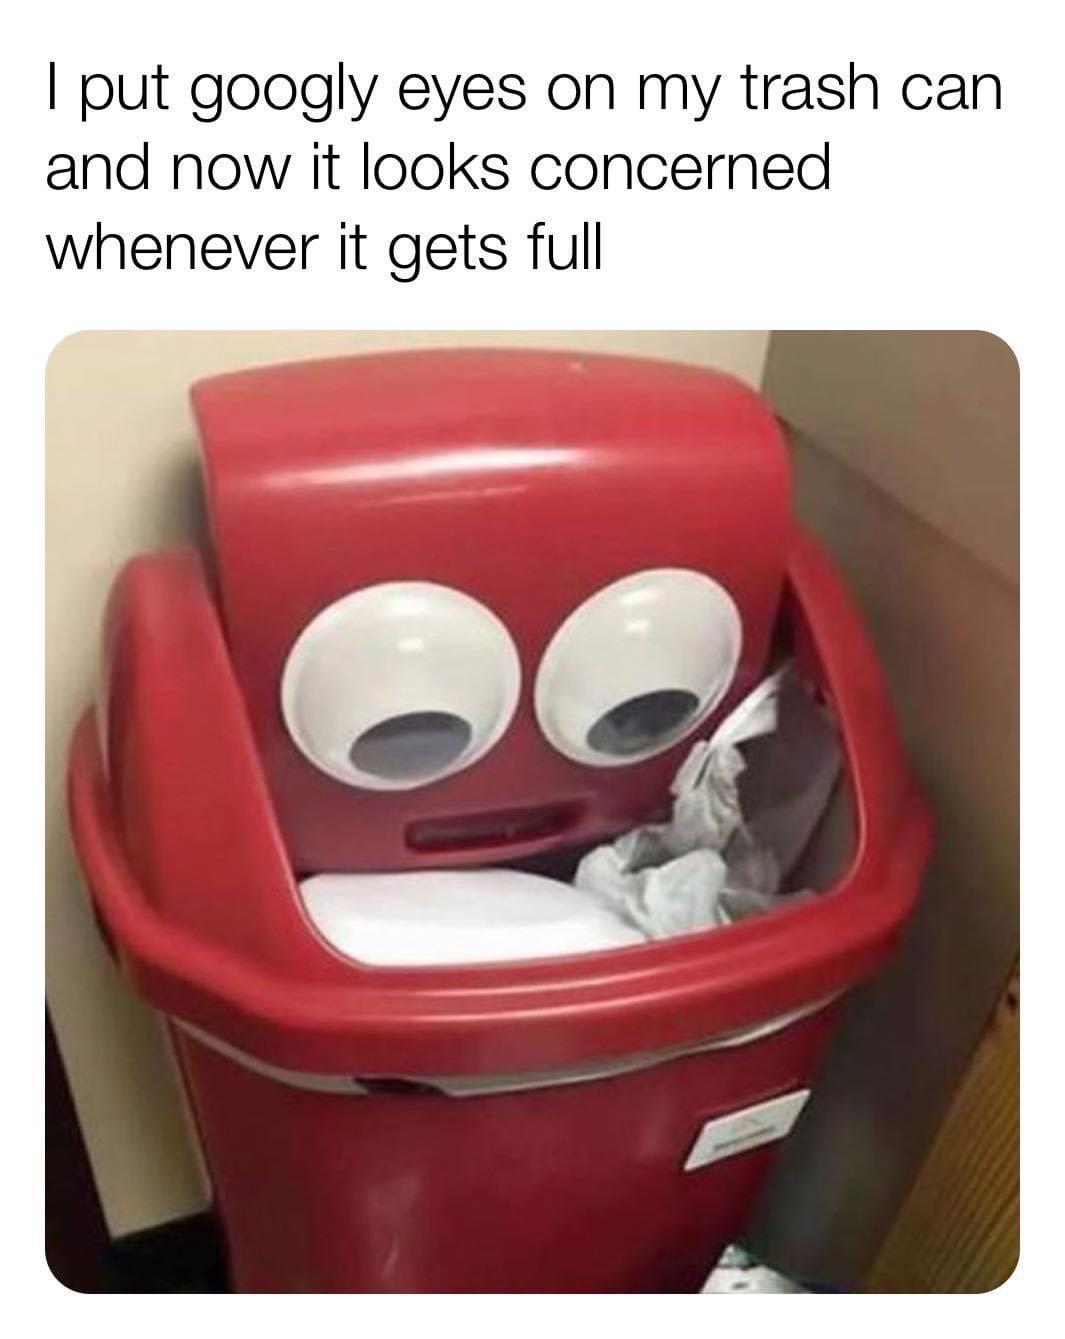 put googly eyes on my trash can - I put googly eyes on my trash can and now it looks concerned whenever it gets full